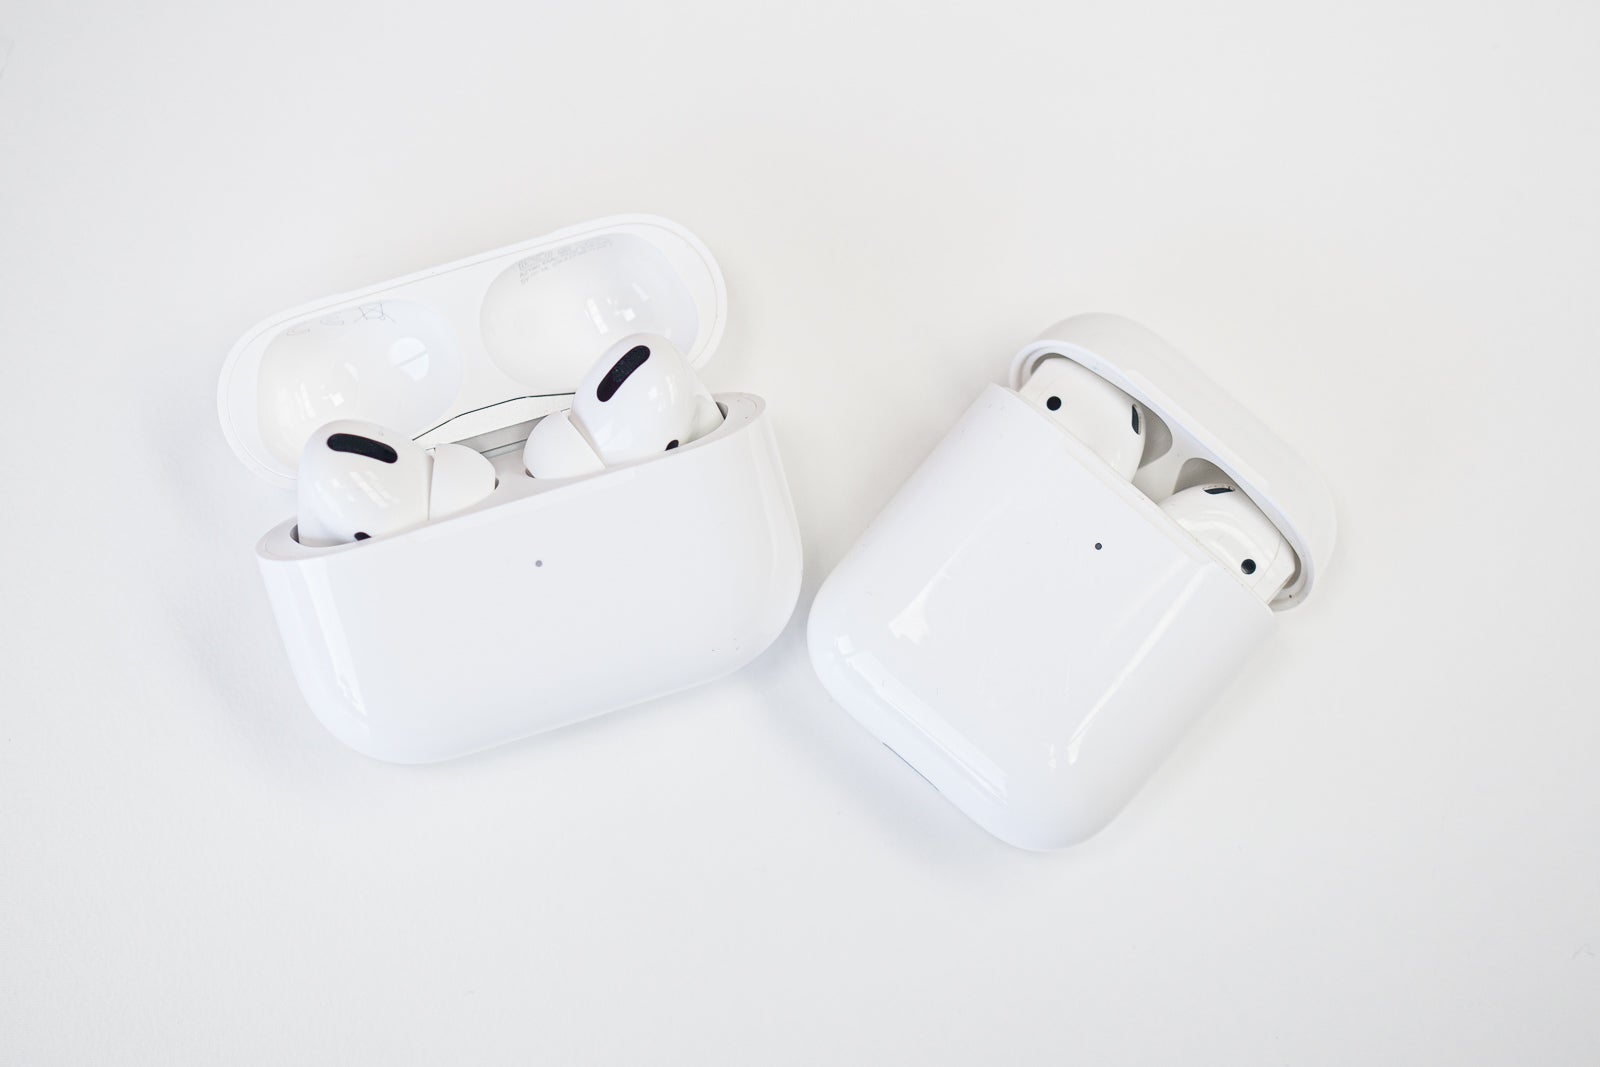 AirPods Pro on the left vs AirPods on the right - AirPods Pro 2 will weather the supply chain storm, coming in the fall